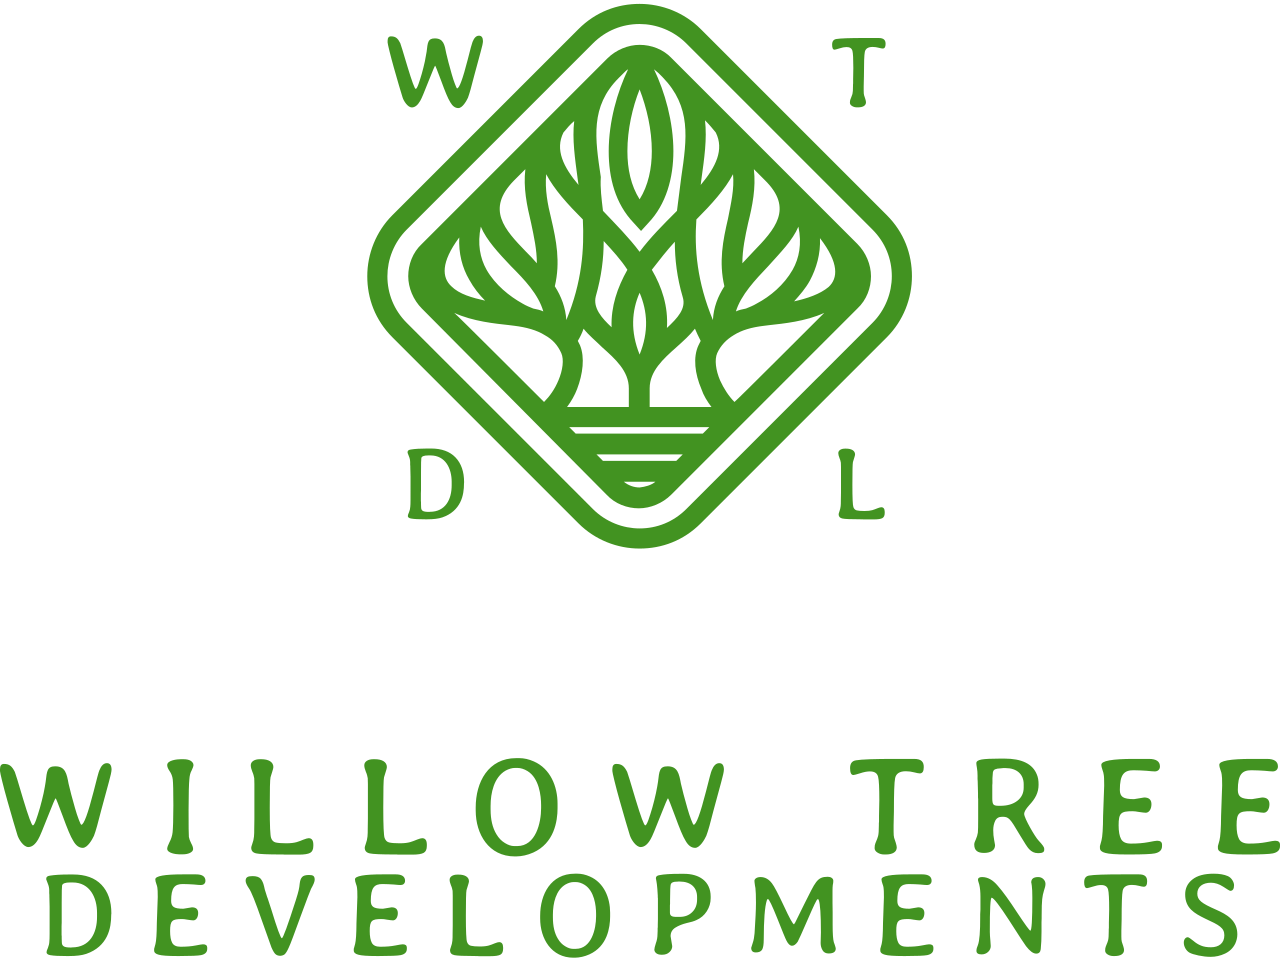 WILLOW TREE's web page